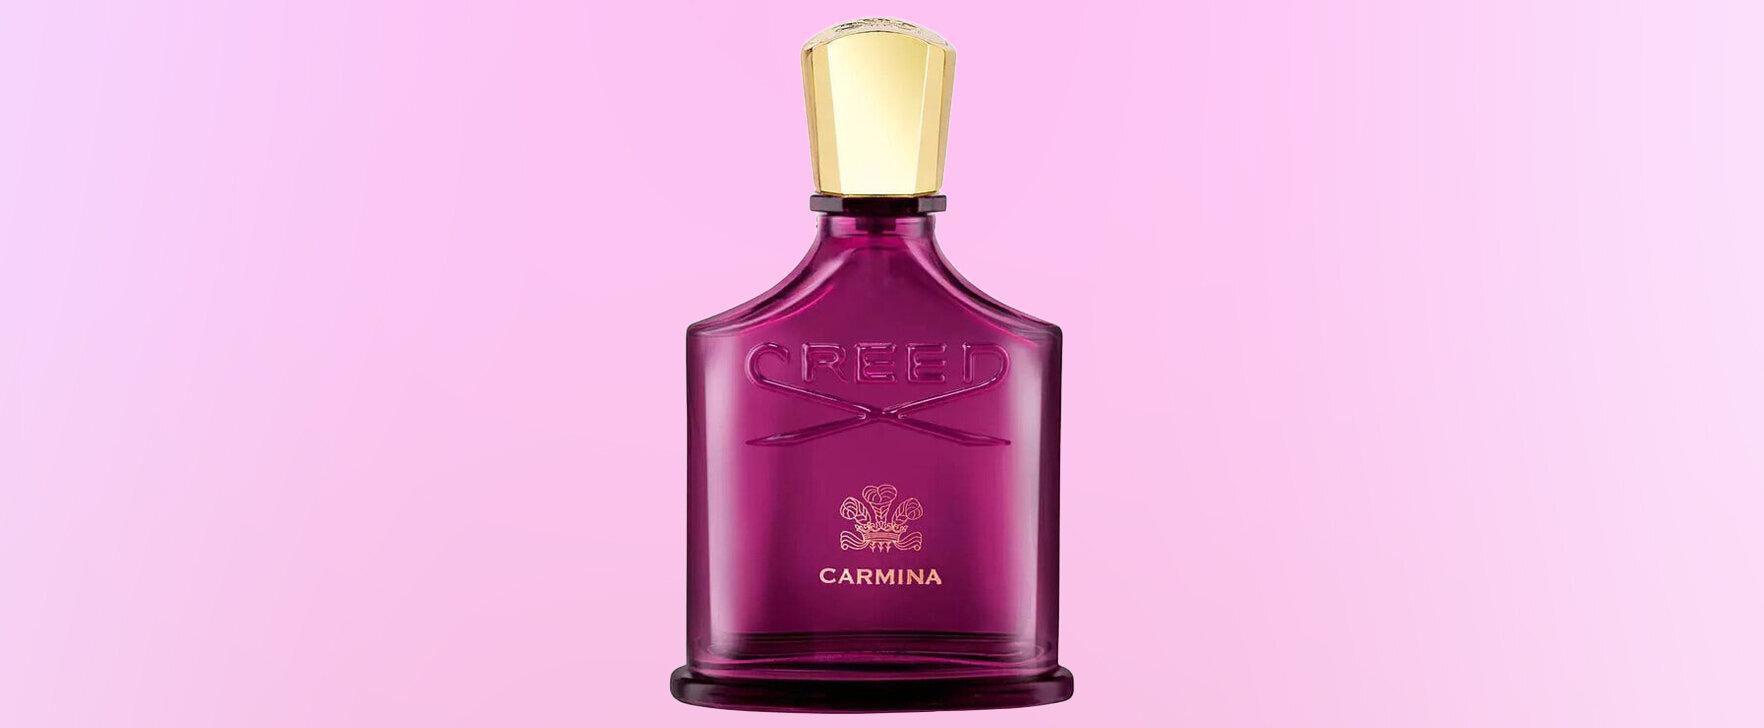 "Carmina" by Creed: A Floral-woody Eau de Parfum That Celebrates the Courage of Women